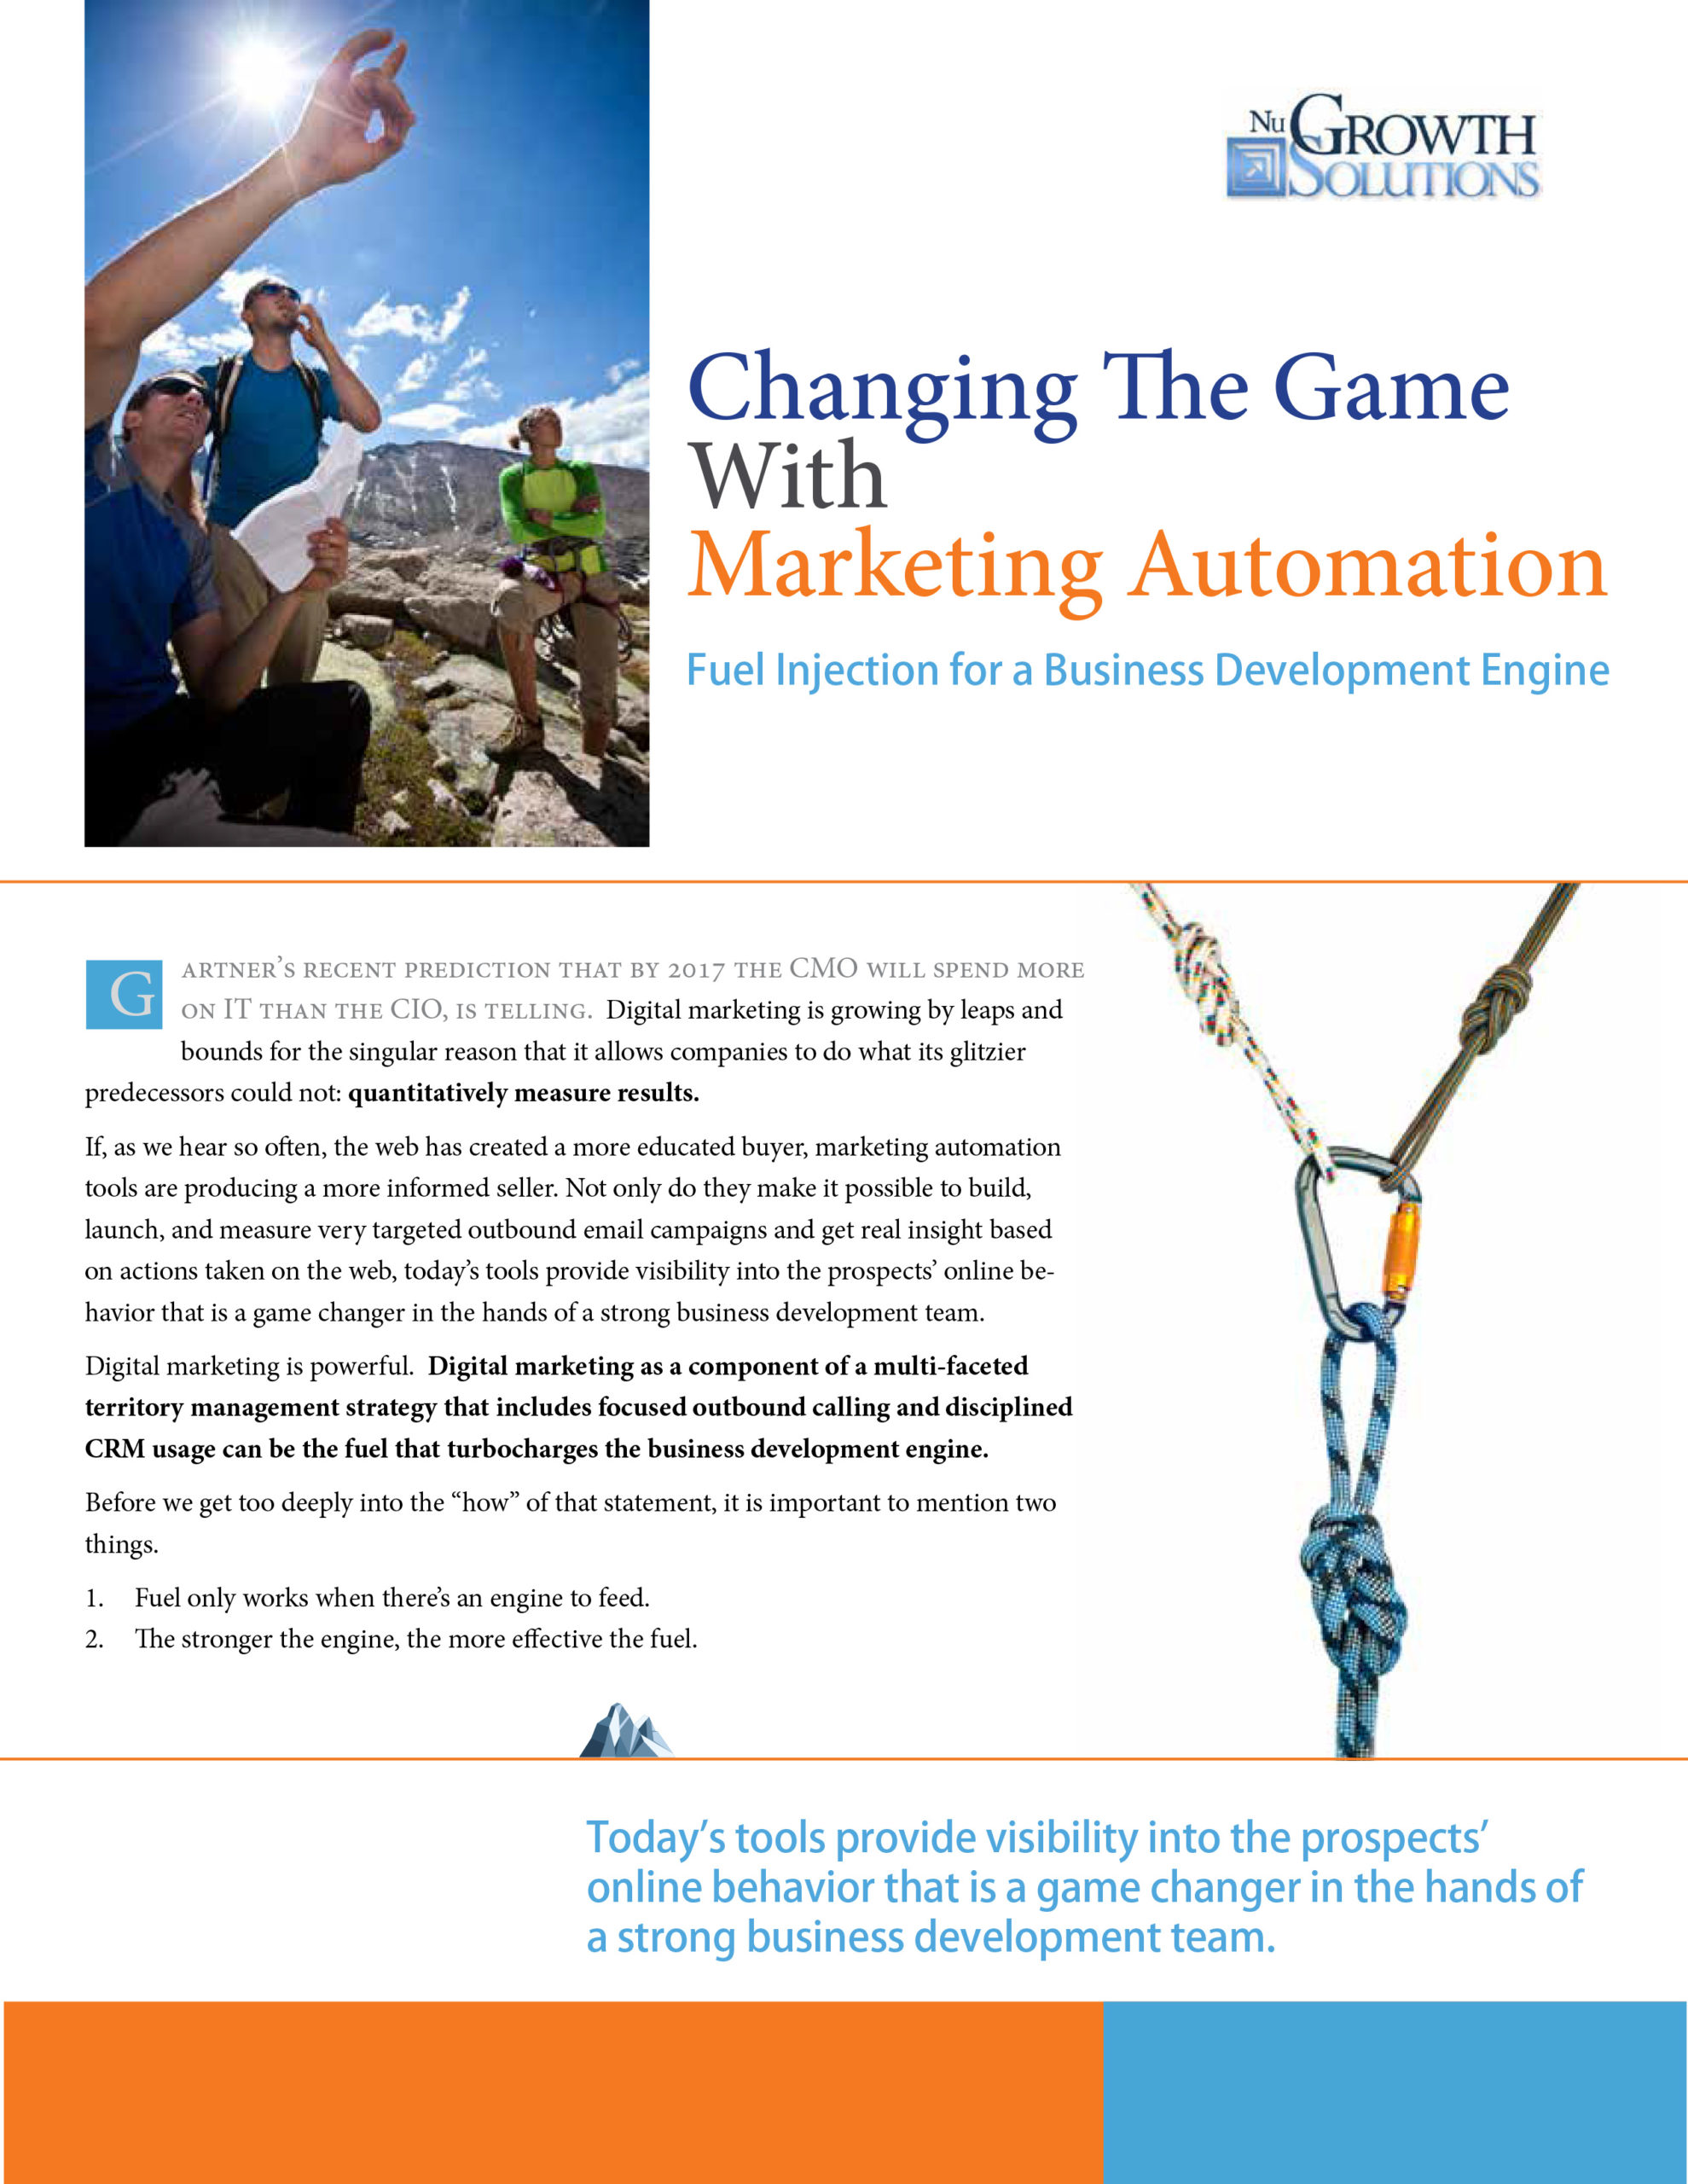 Changing_the_Game_with_Marketing_Automation